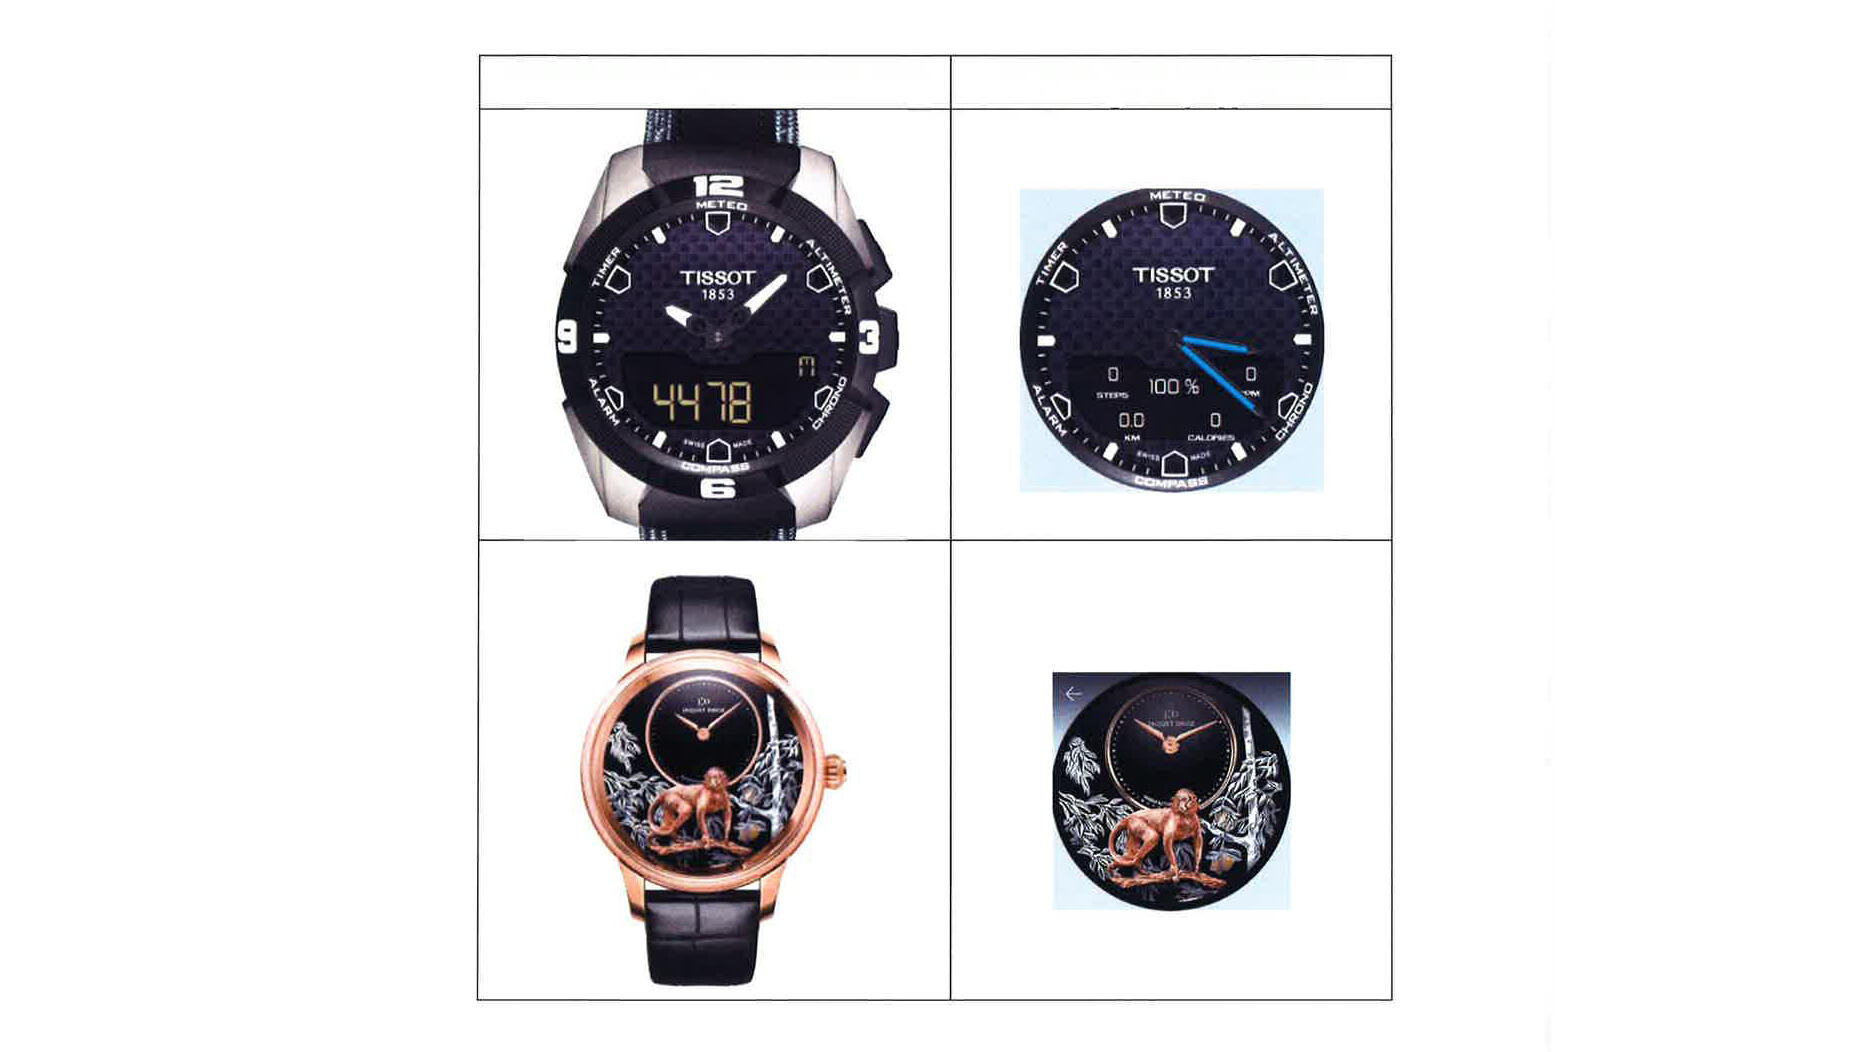 Swatch Group watches next to allegedly infringing downloadable watch faces from Samsung